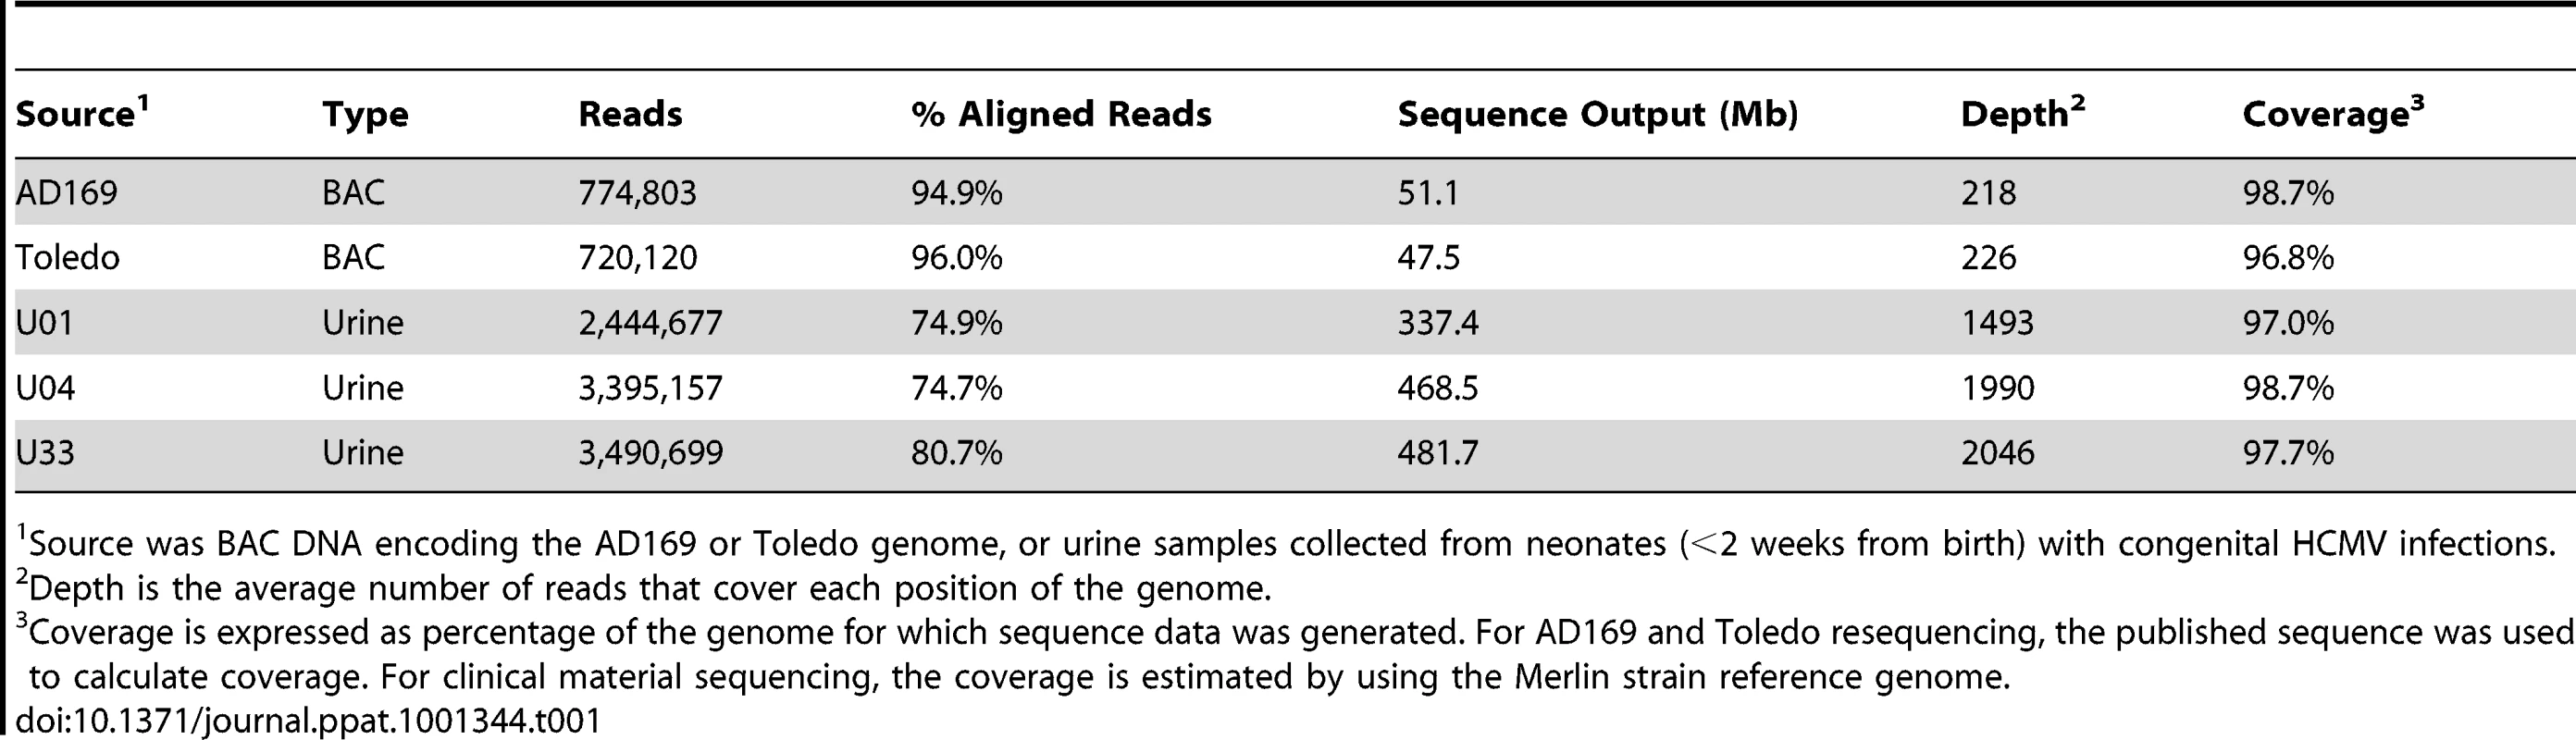 Sequence output of high throughput sequencing experiments.